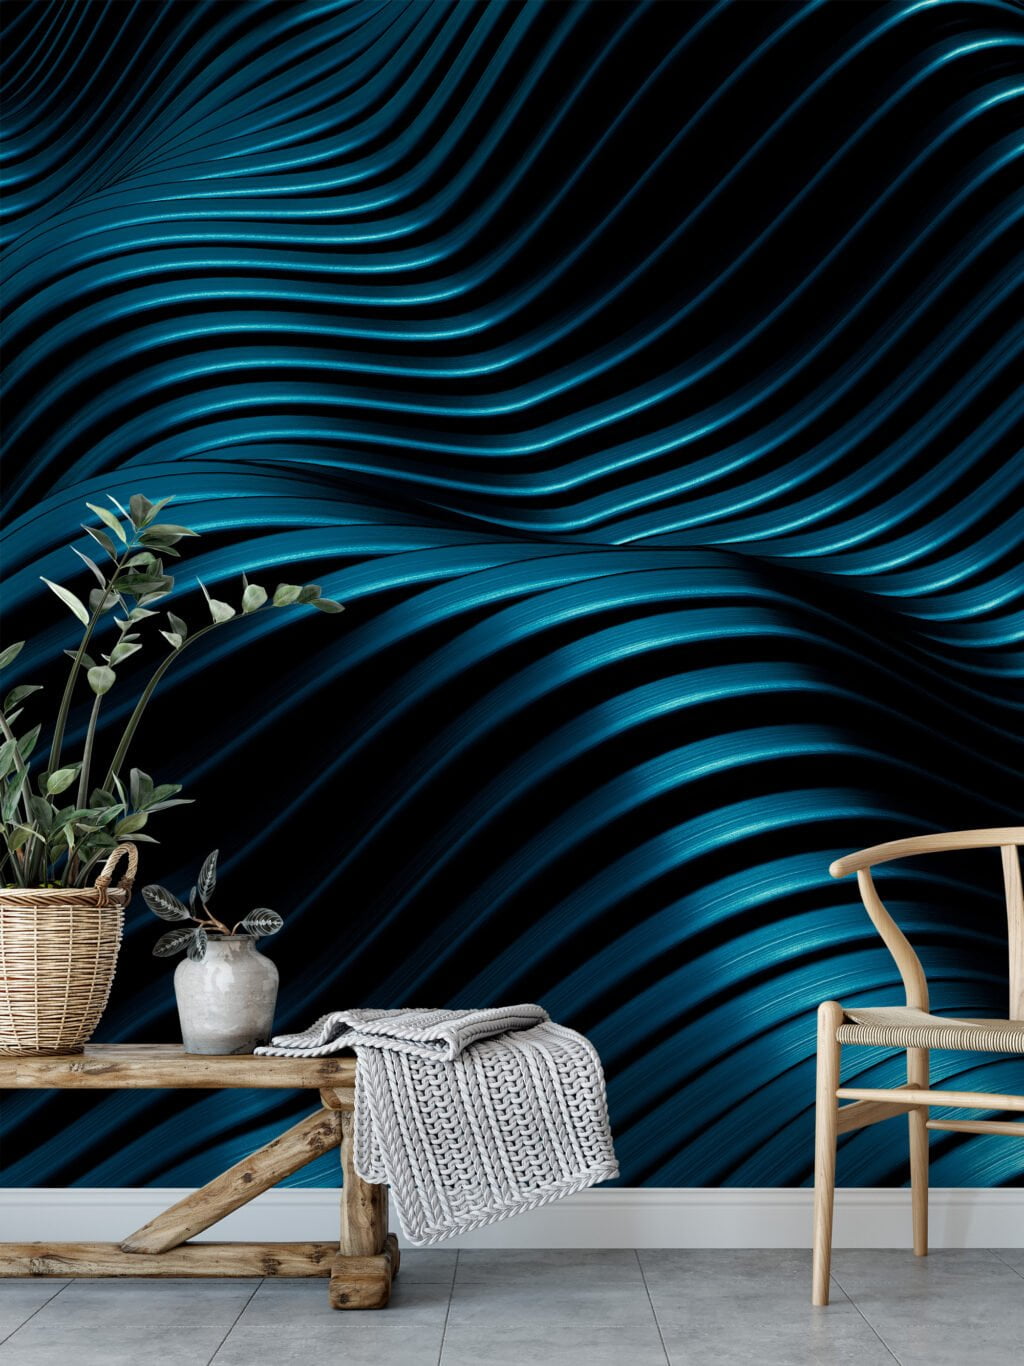 Self-Adhesive Dark Turquoise Waves Wallpaper, Customizable Mural for Any Space, Removable